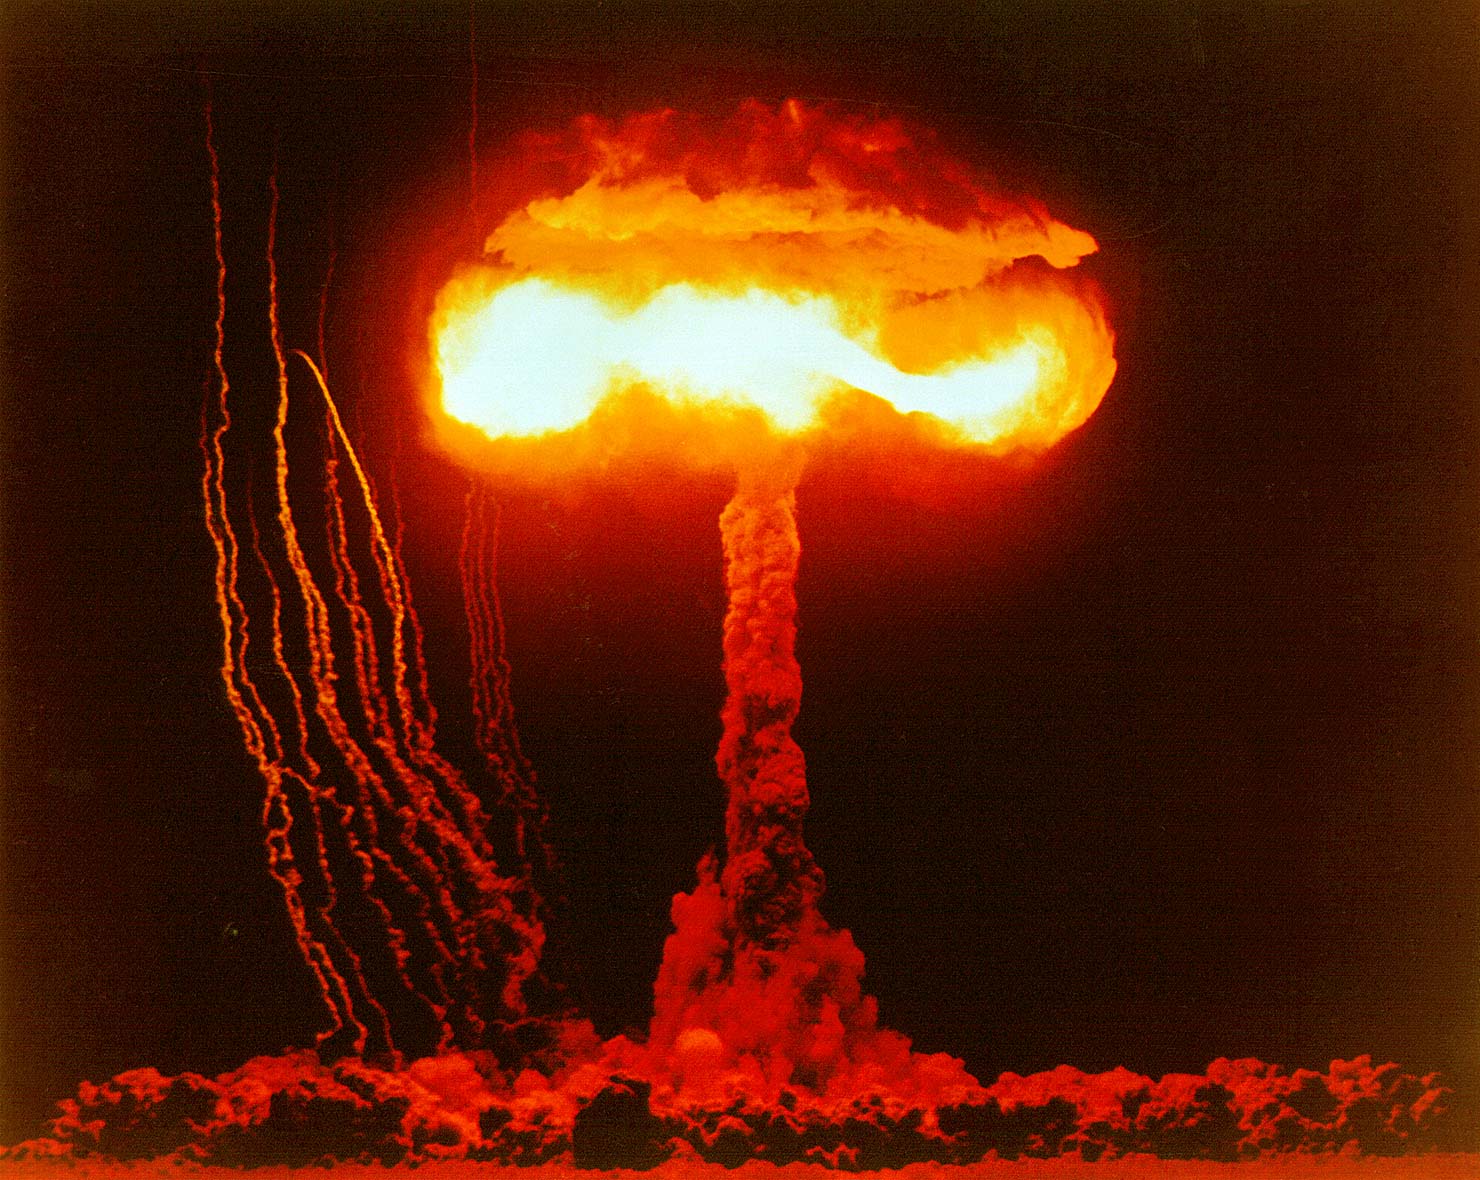 CLIMAX
CLIMAX, part of Operation Upshot/Knothole, was a 61 kiloton device fired June 4, 1953 at the Nevada Test Site.
Keywords: Nevada Test Site, Mercury, Nye County, Nevada NTS